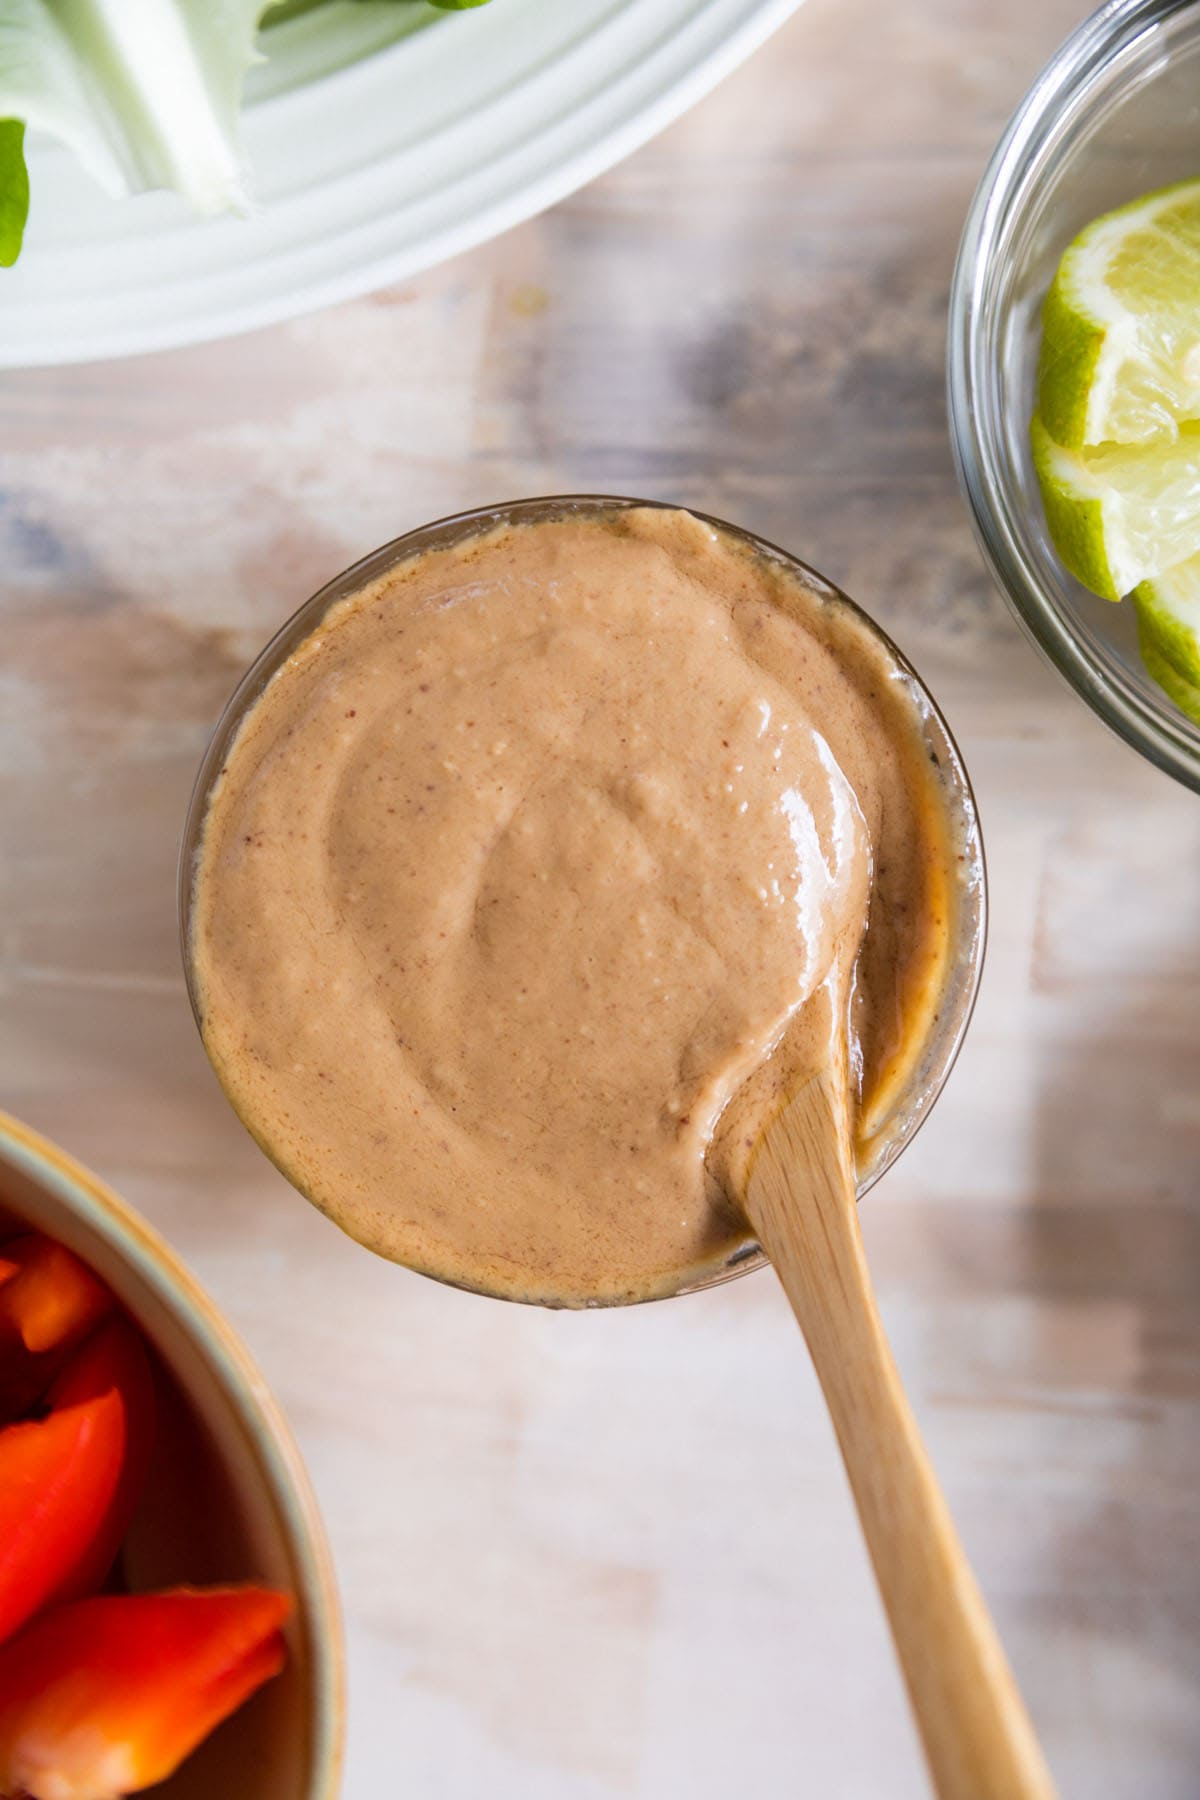 peanut sauce in a small bowl with a wooden spoon sticking out of it.